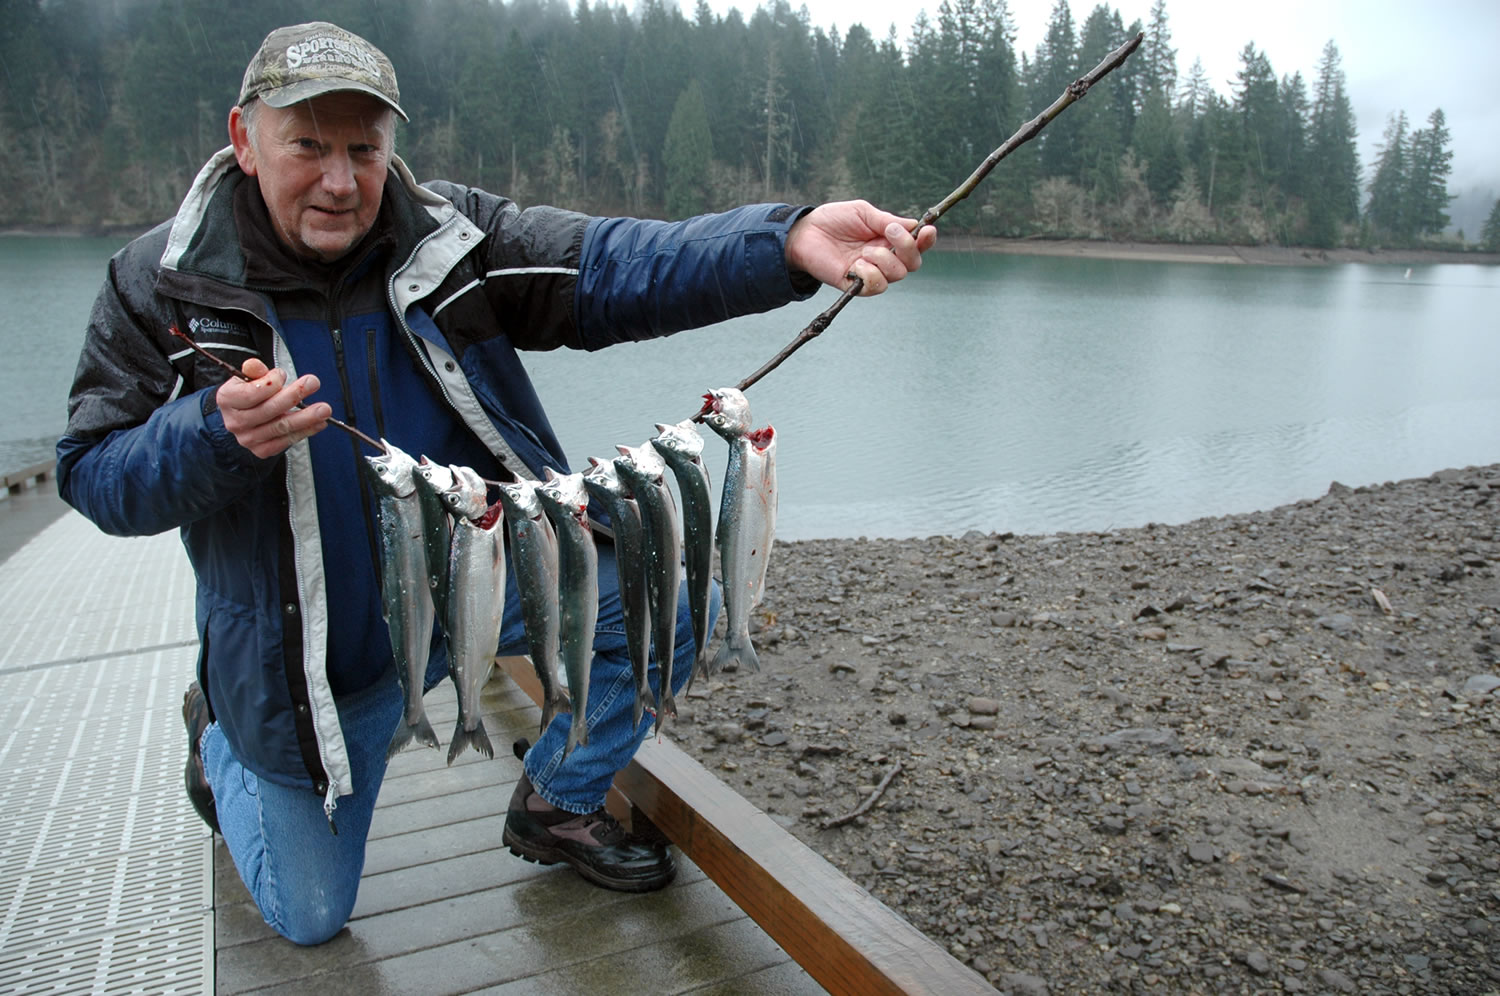 Merwin Reservoir daily bag limit to double in May - The Columbian